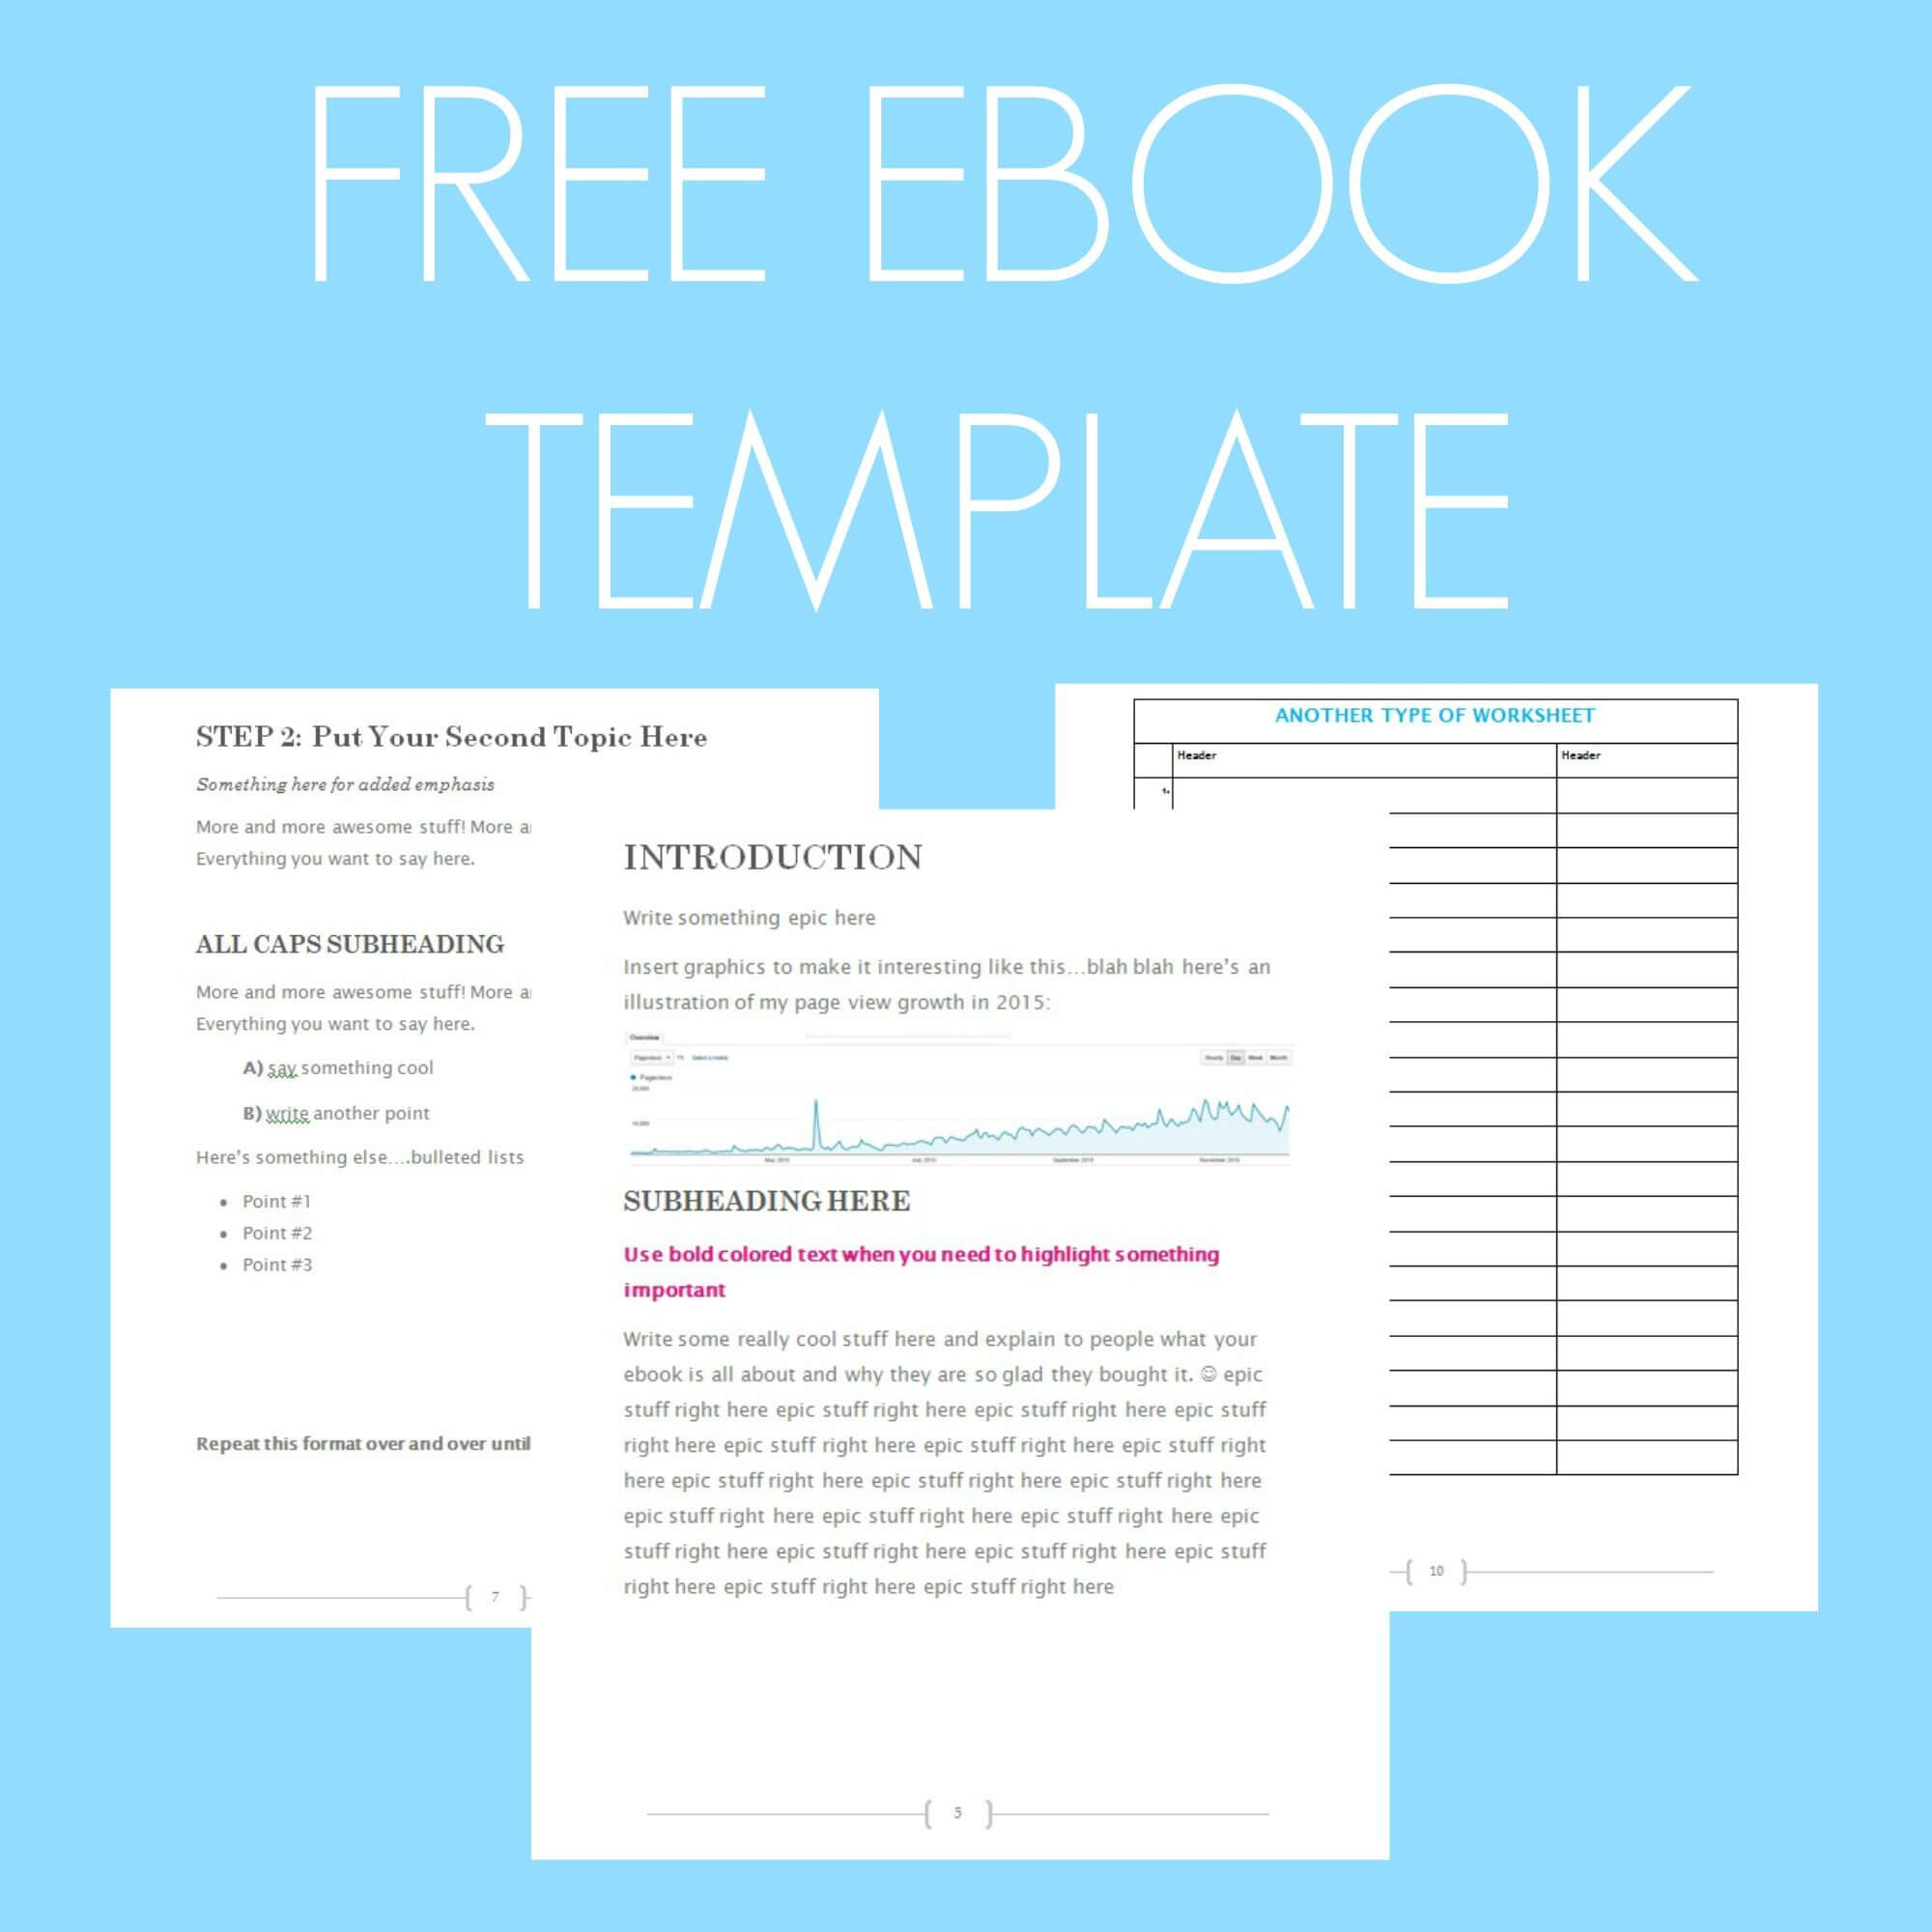 Free Ebook Template – Preformatted Word Document | Writing In Another Word For Template